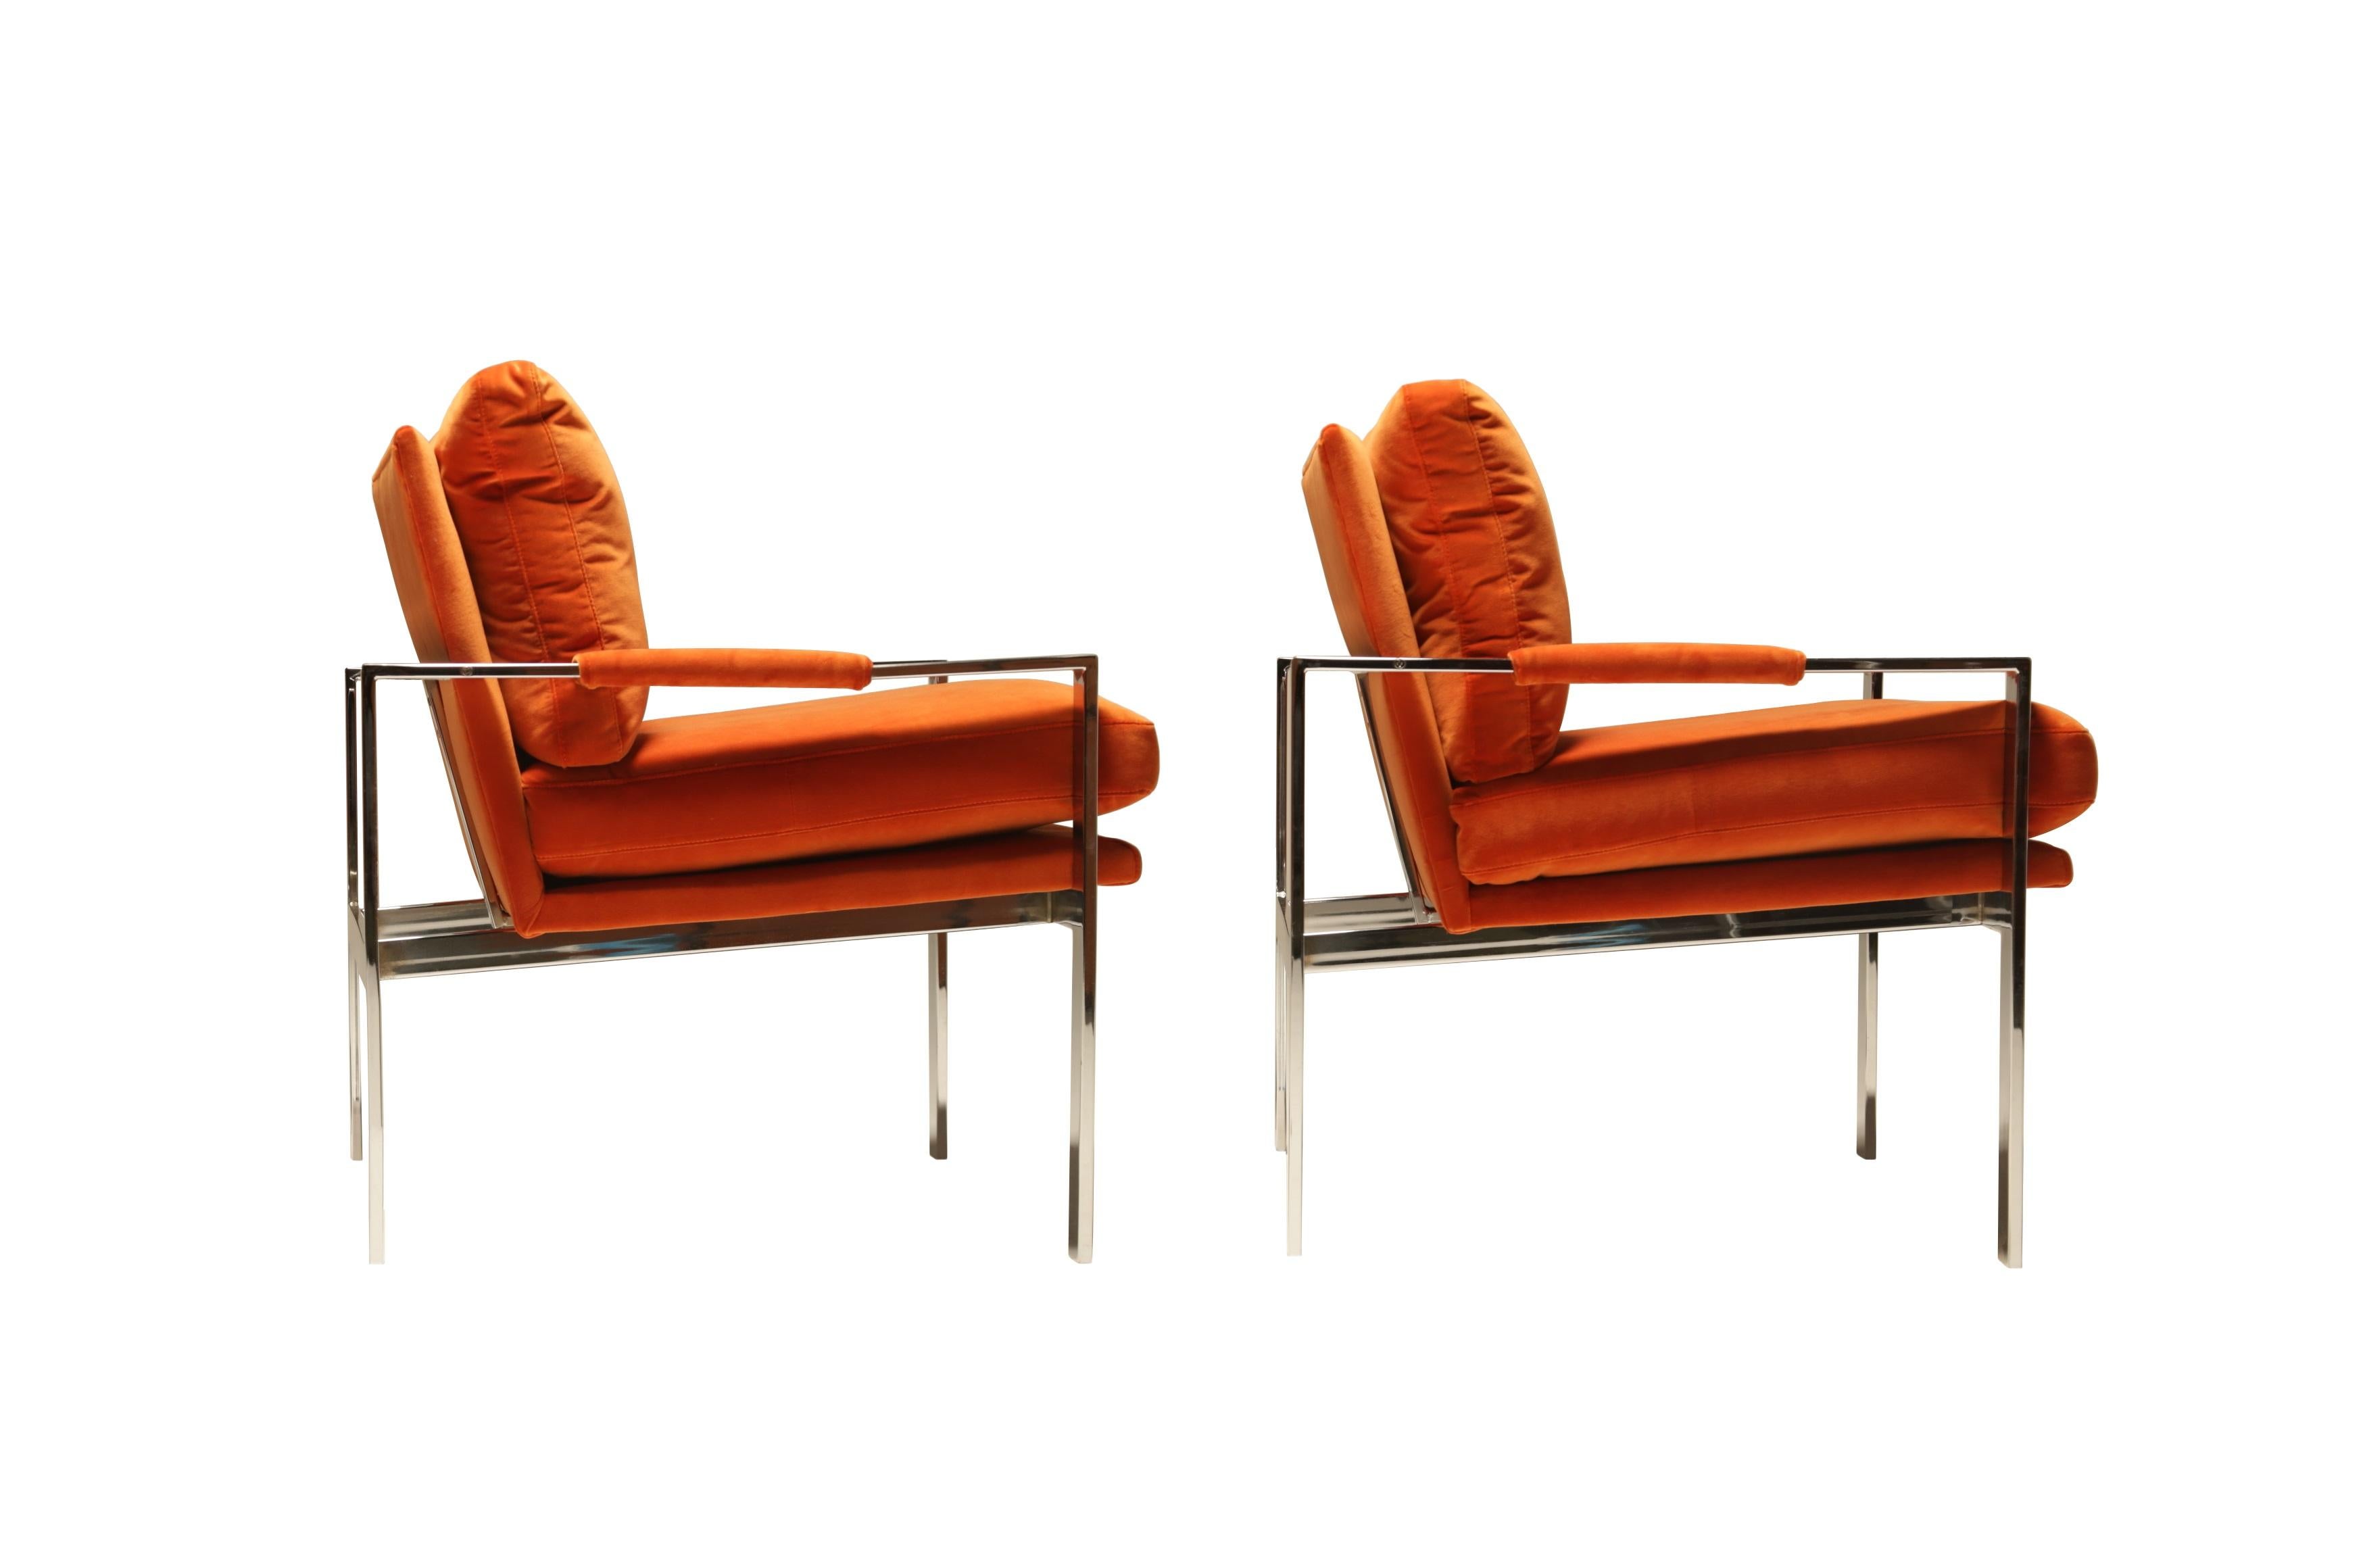 Pair of Milo Baughman Flat Bar Chrome Armchairs In Good Condition For Sale In Dallas, TX